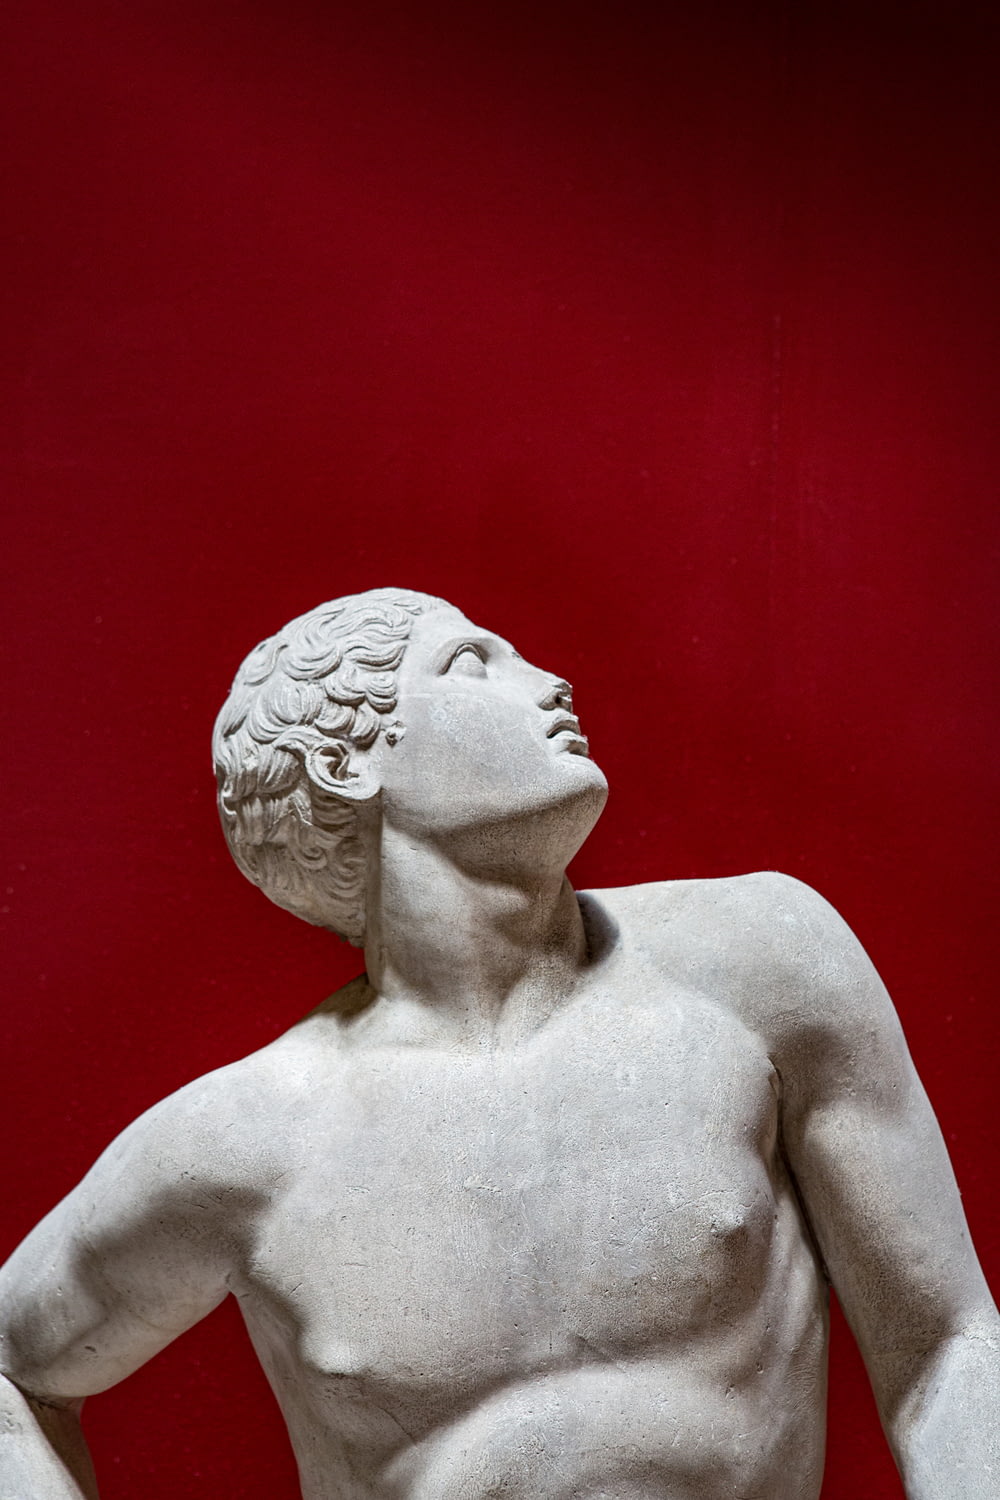 Grecian male statue looks up on red background